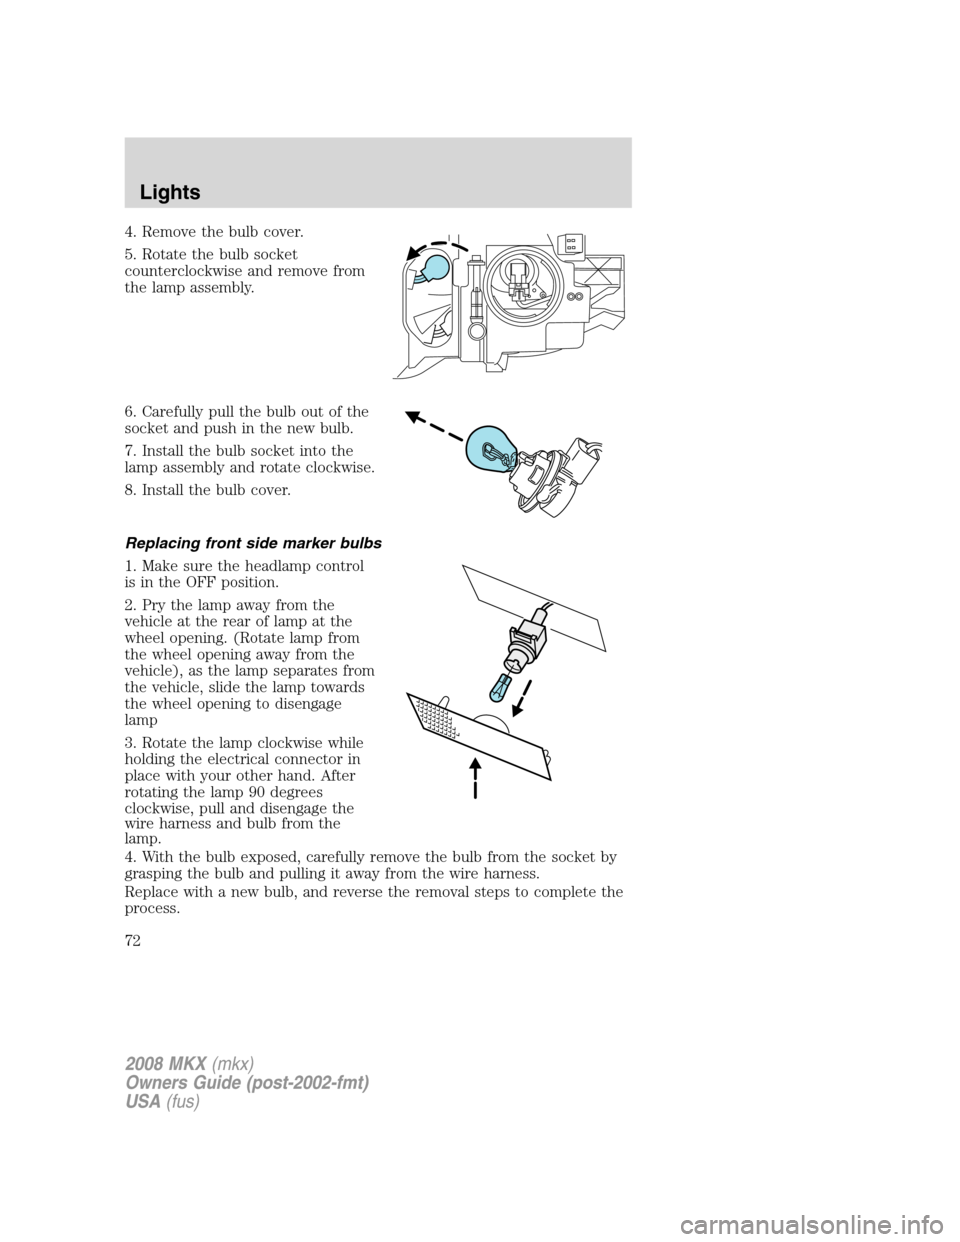 LINCOLN MKX 2008  Owners Manual 4. Remove the bulb cover.
5. Rotate the bulb socket
counterclockwise and remove from
the lamp assembly.
6. Carefully pull the bulb out of the
socket and push in the new bulb.
7. Install the bulb socke